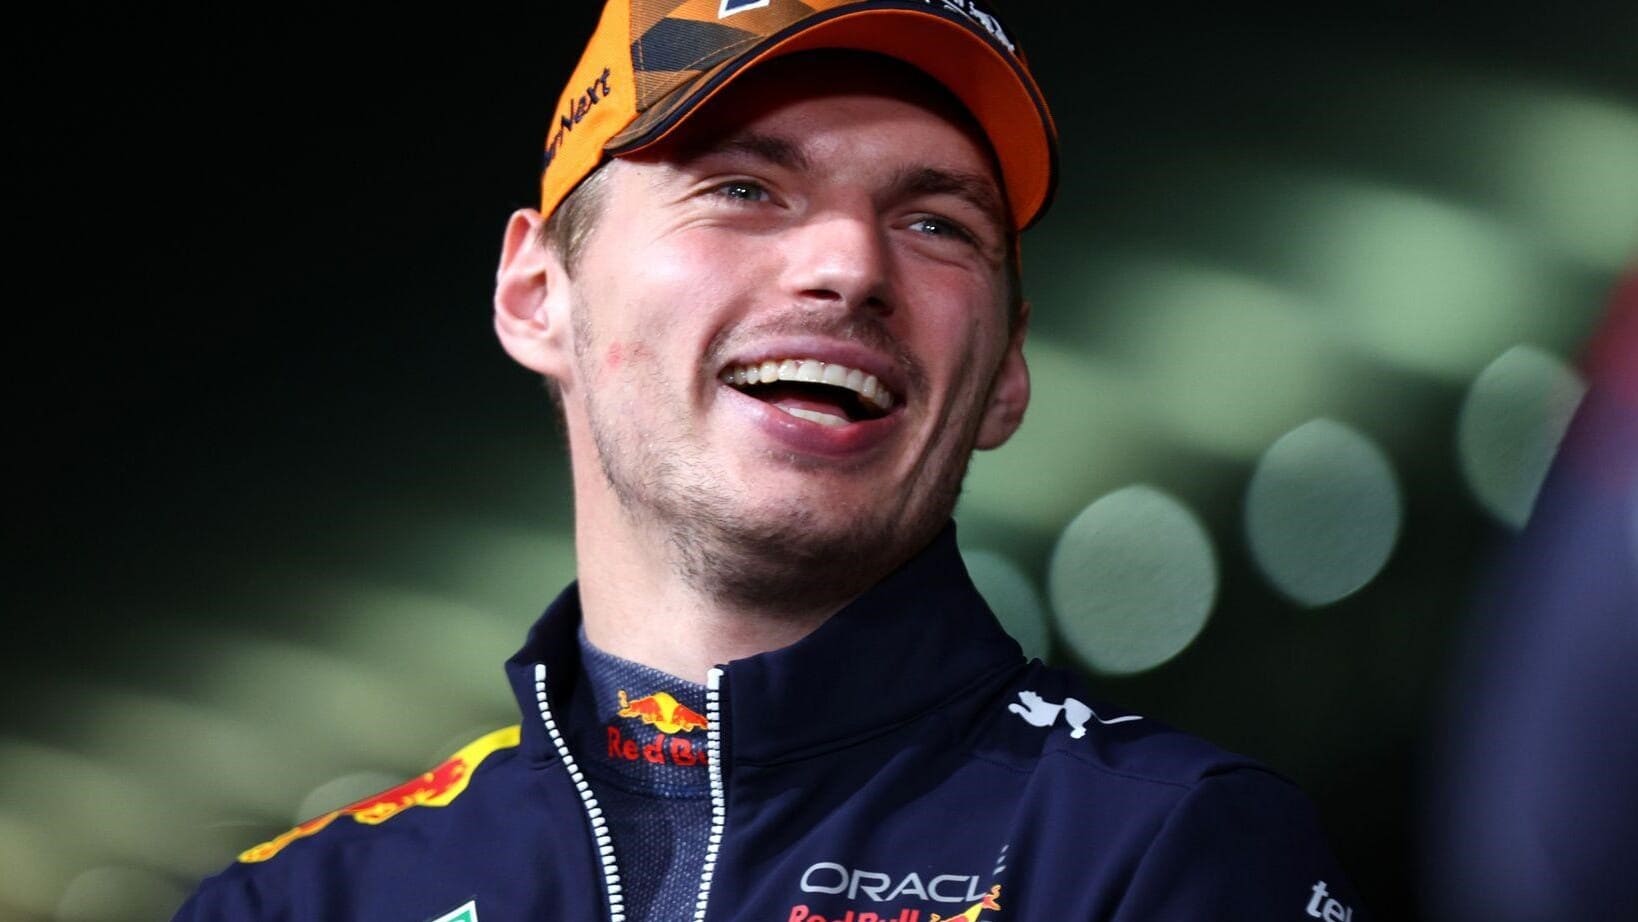 Interesting things about Verstappen